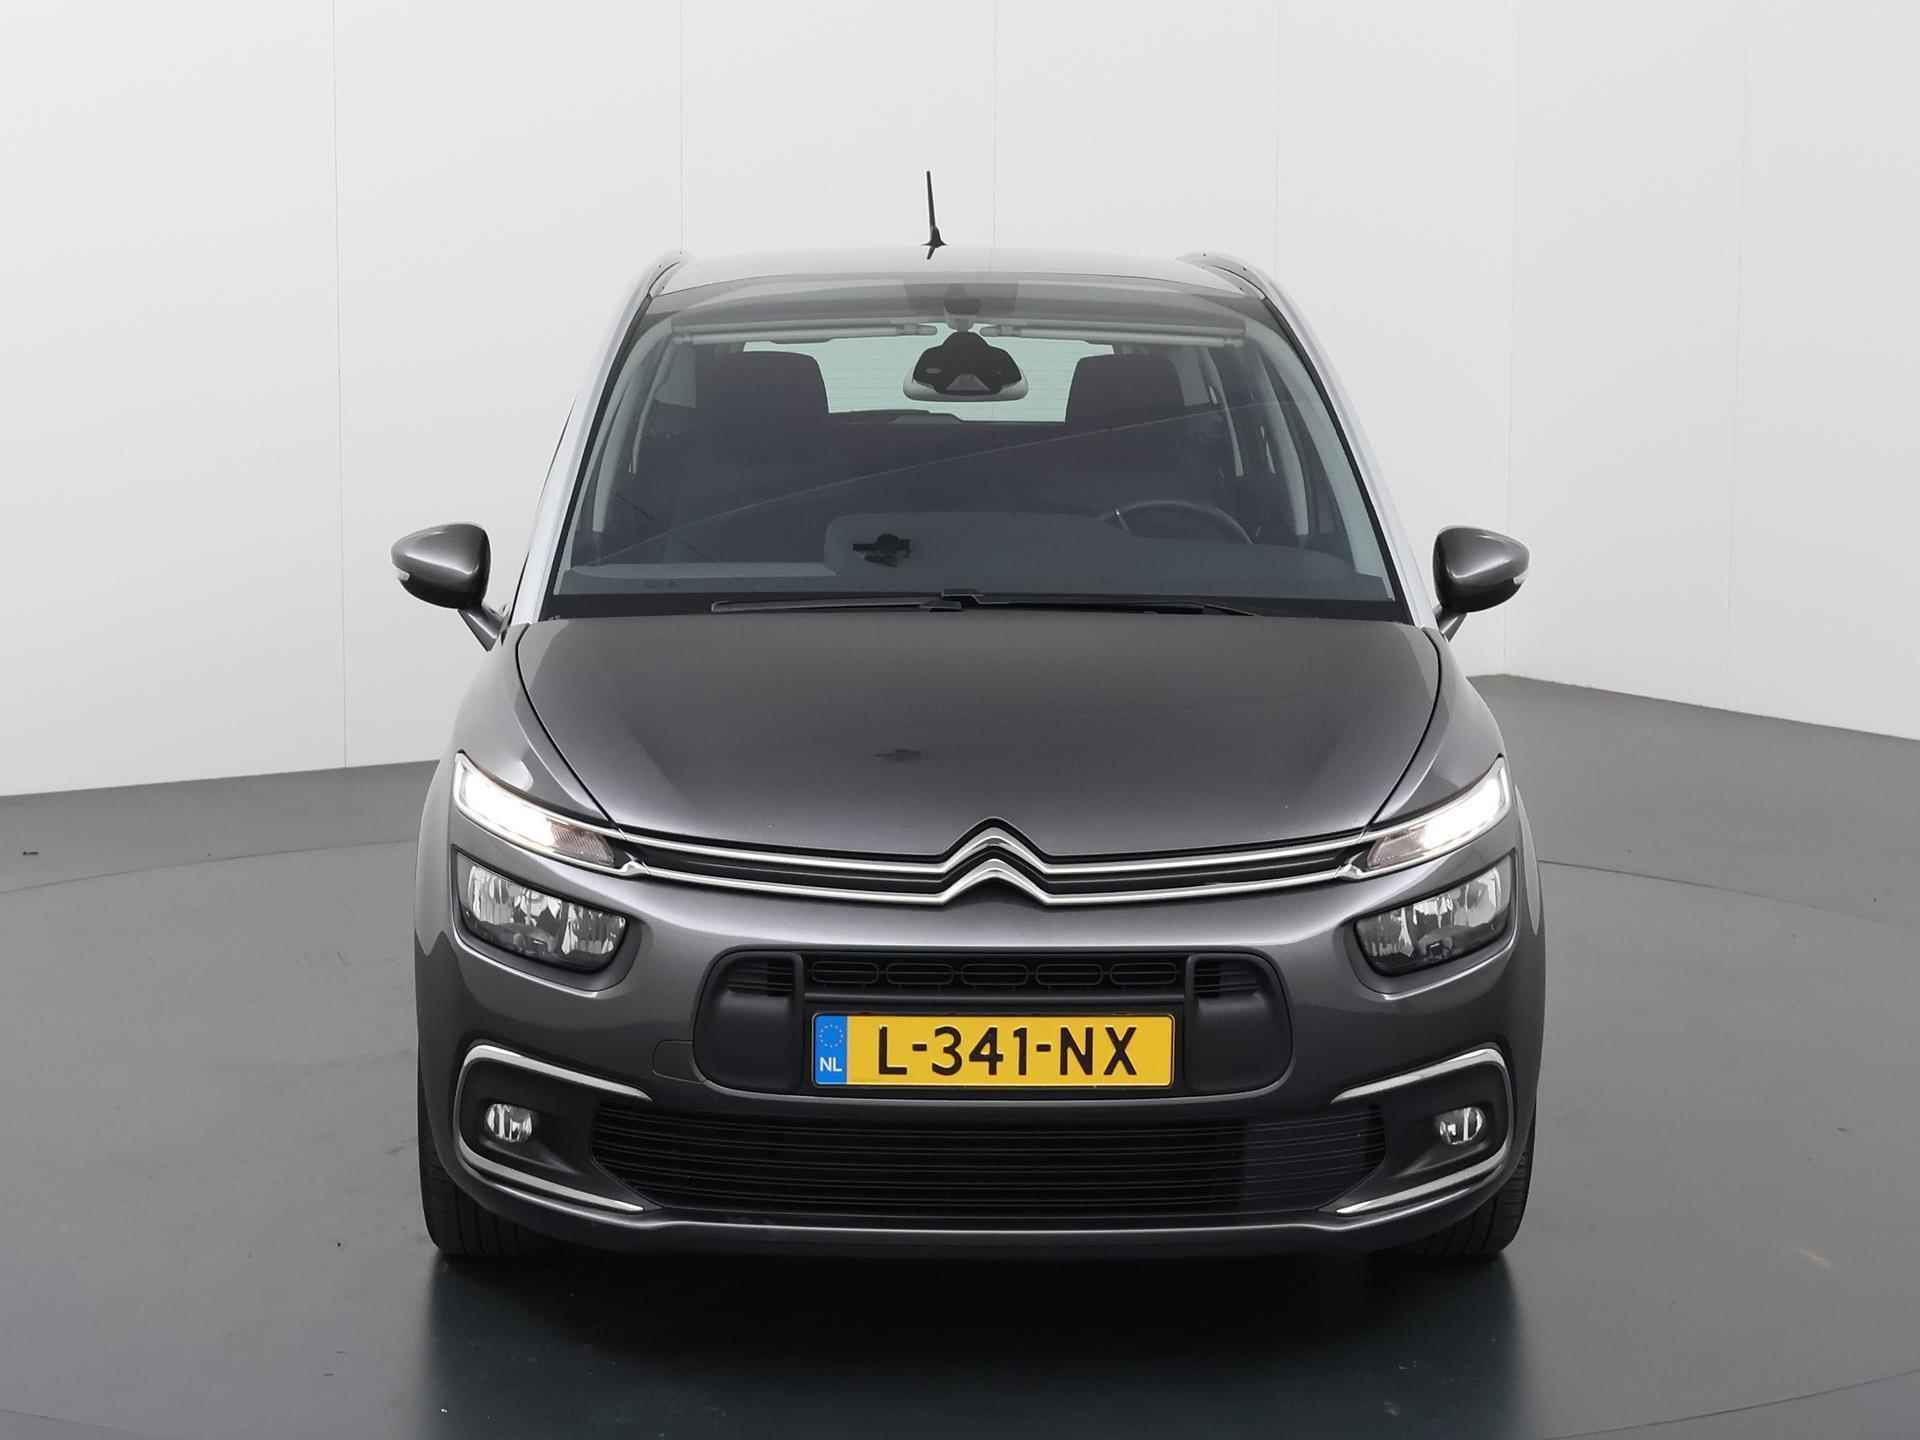 Citroen Grand C4 SpaceTourer 1.2 PureTech Business | 7 Persoons | Automaat | Navigatiesysteem | Achteruitrijcamera | Cruise Control | Climate Control | Apple Carplay/Android Auto | - 4/36